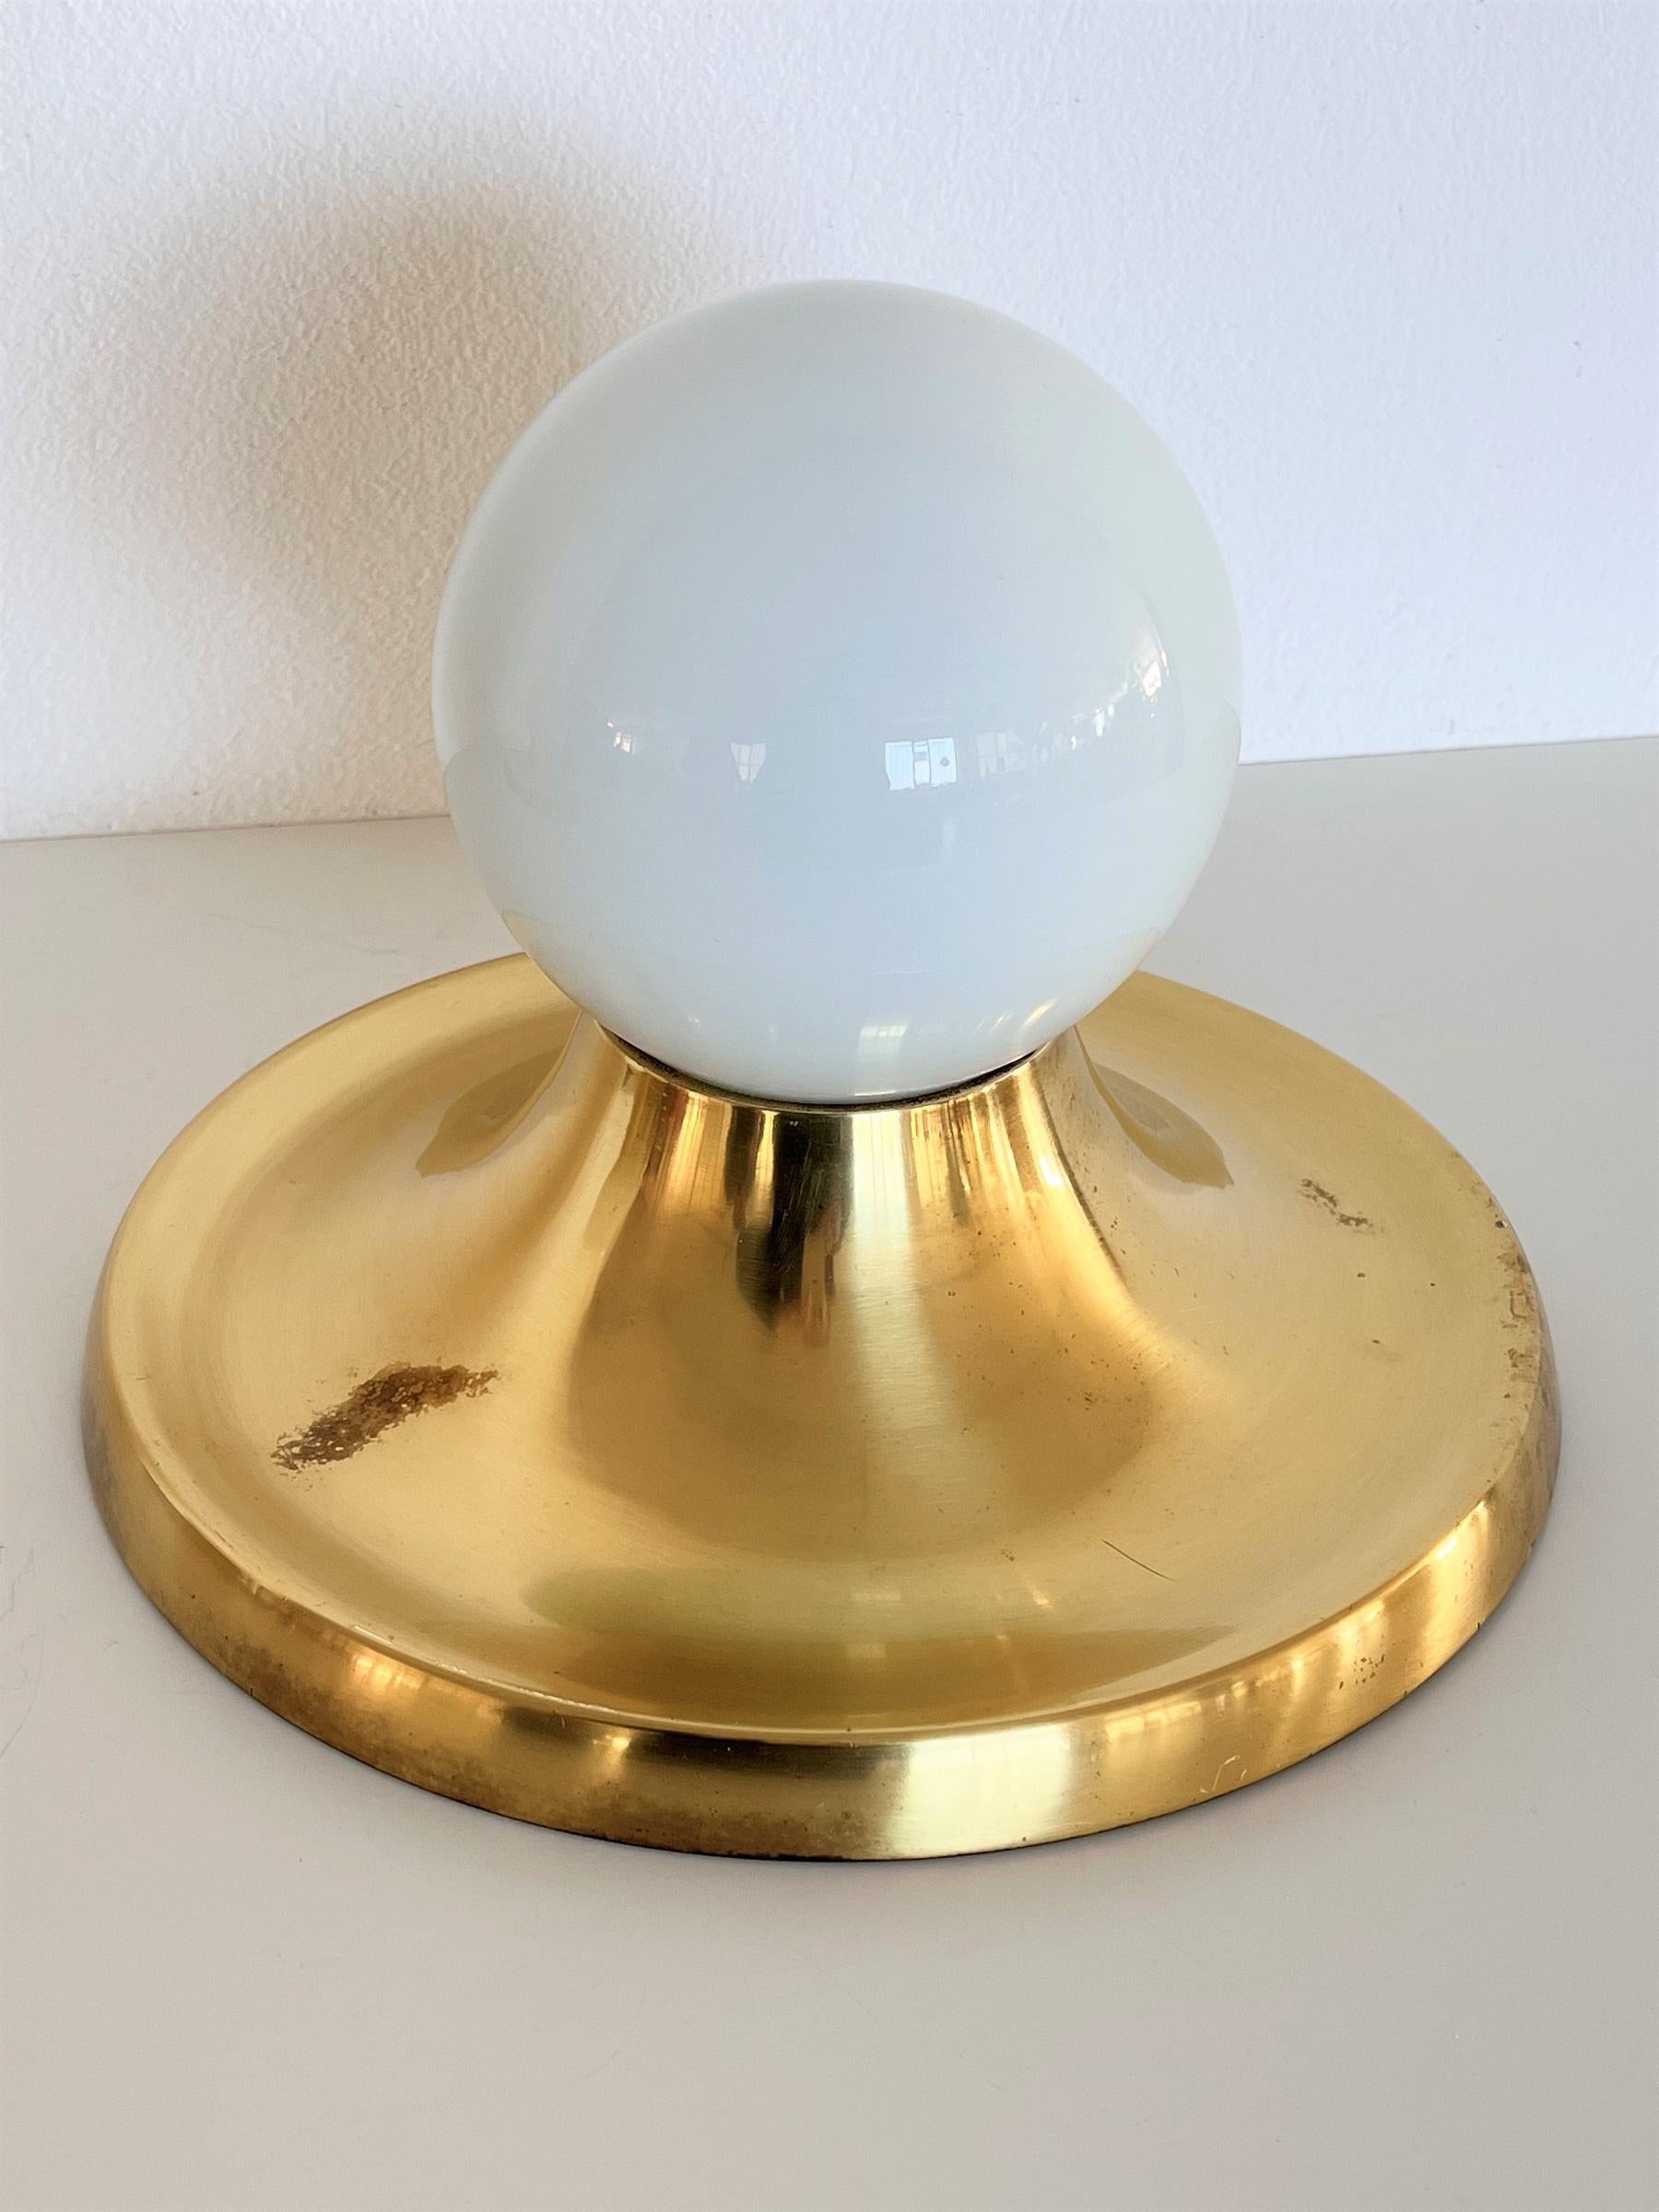 Italian Achille Castiglioni 'Light Ball' Wall or Ceiling Lamp for Flos, 1960s For Sale 6